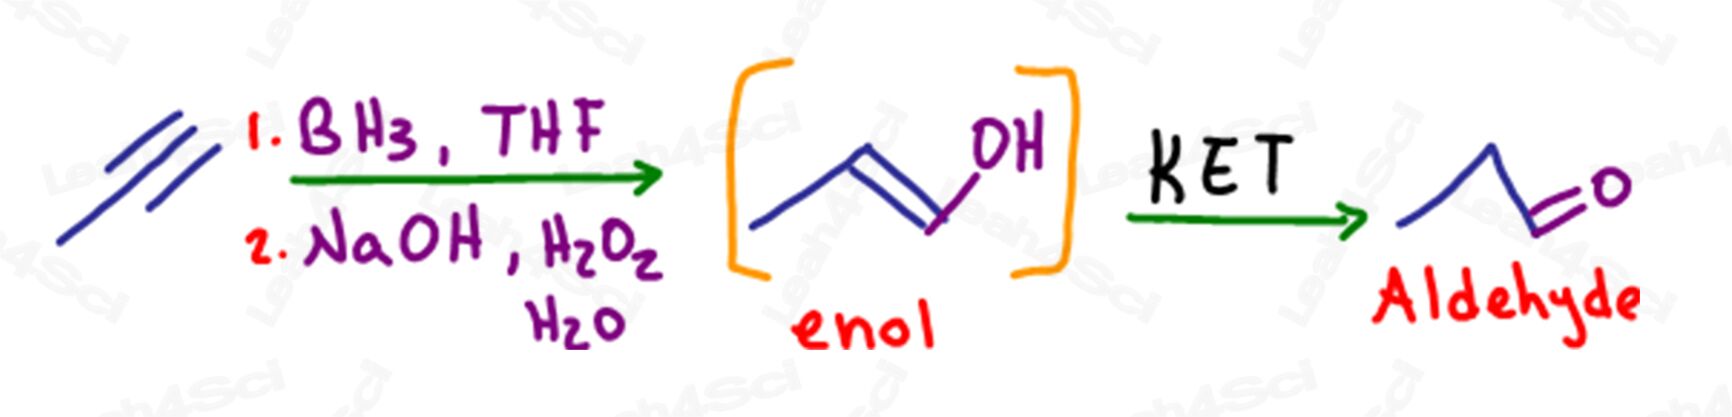 KET in Hydroboration of alkynes with terminal enol intermediate and aldehyde product by Leah4sci